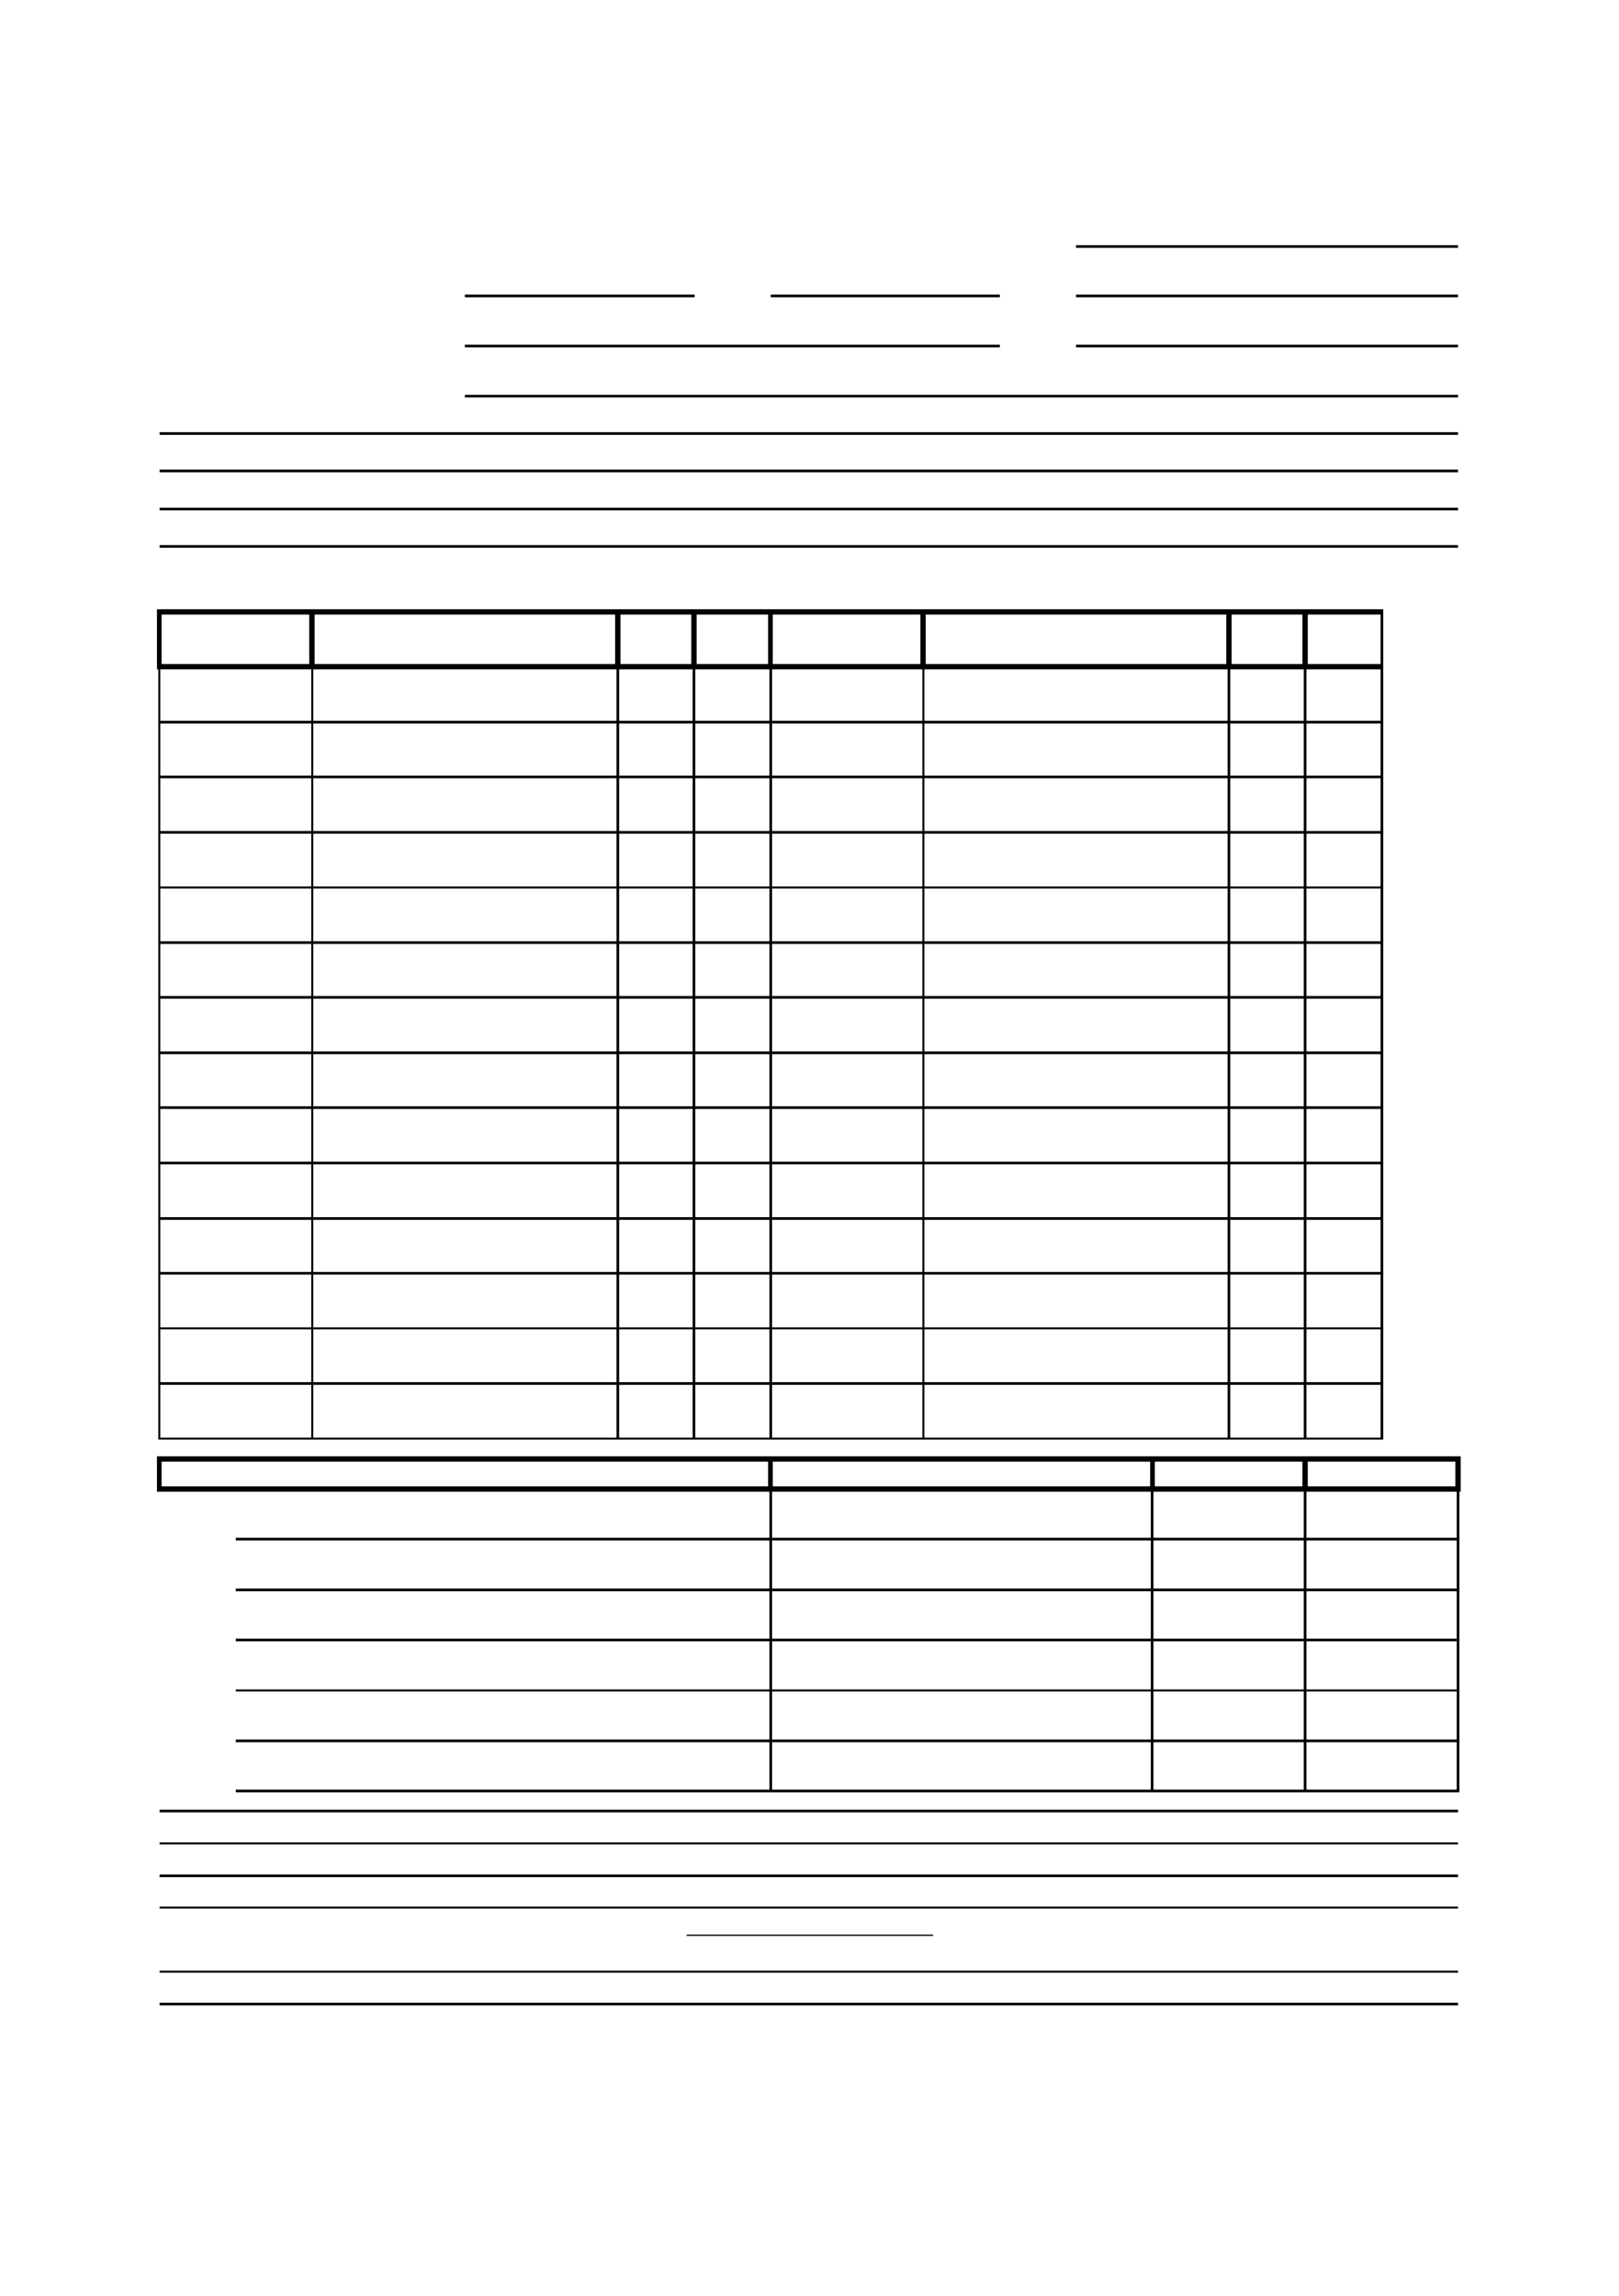 Film Call Sheet Template Free Download Within Film Call Sheet Template Word